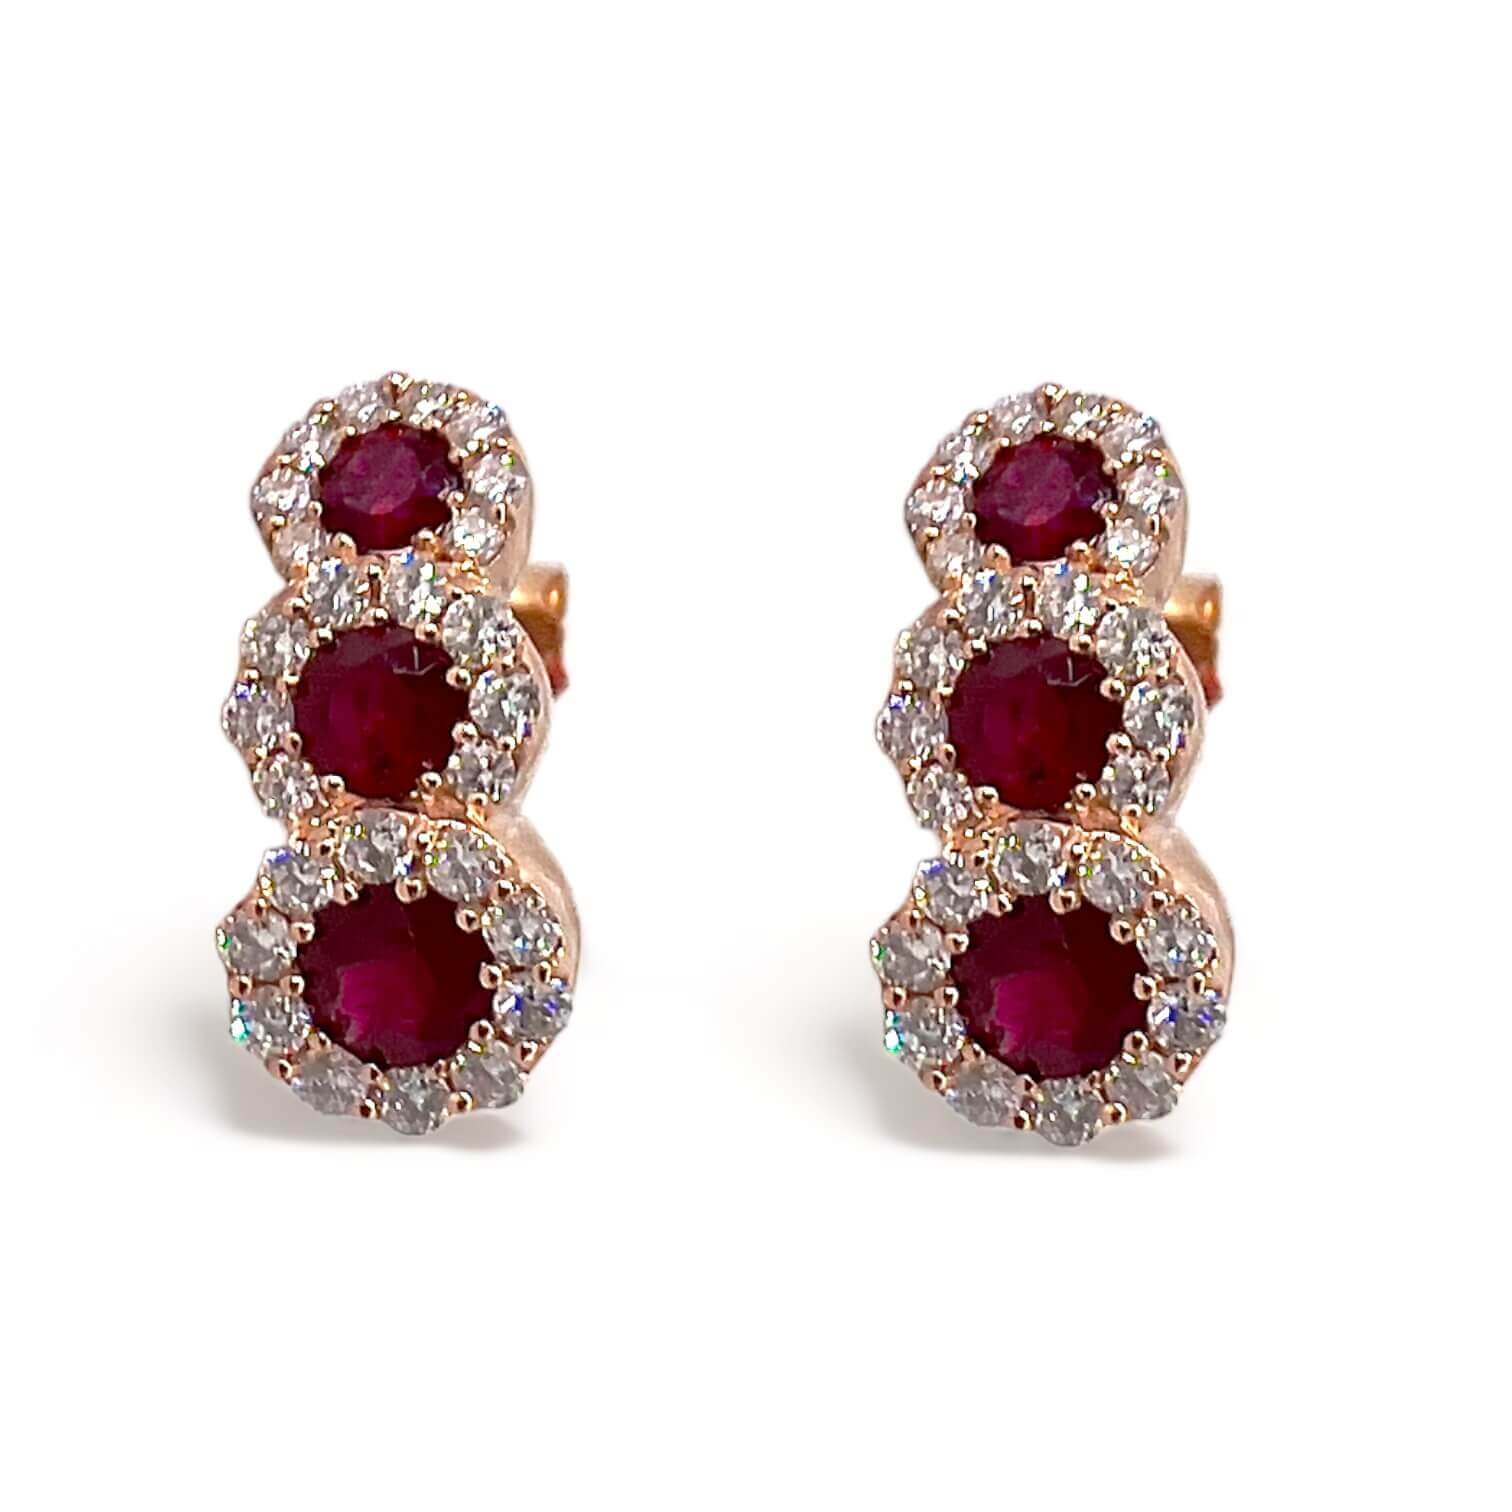 Rubies earrings in gold and diamonds BELLE EPOQUE Art. OR1596